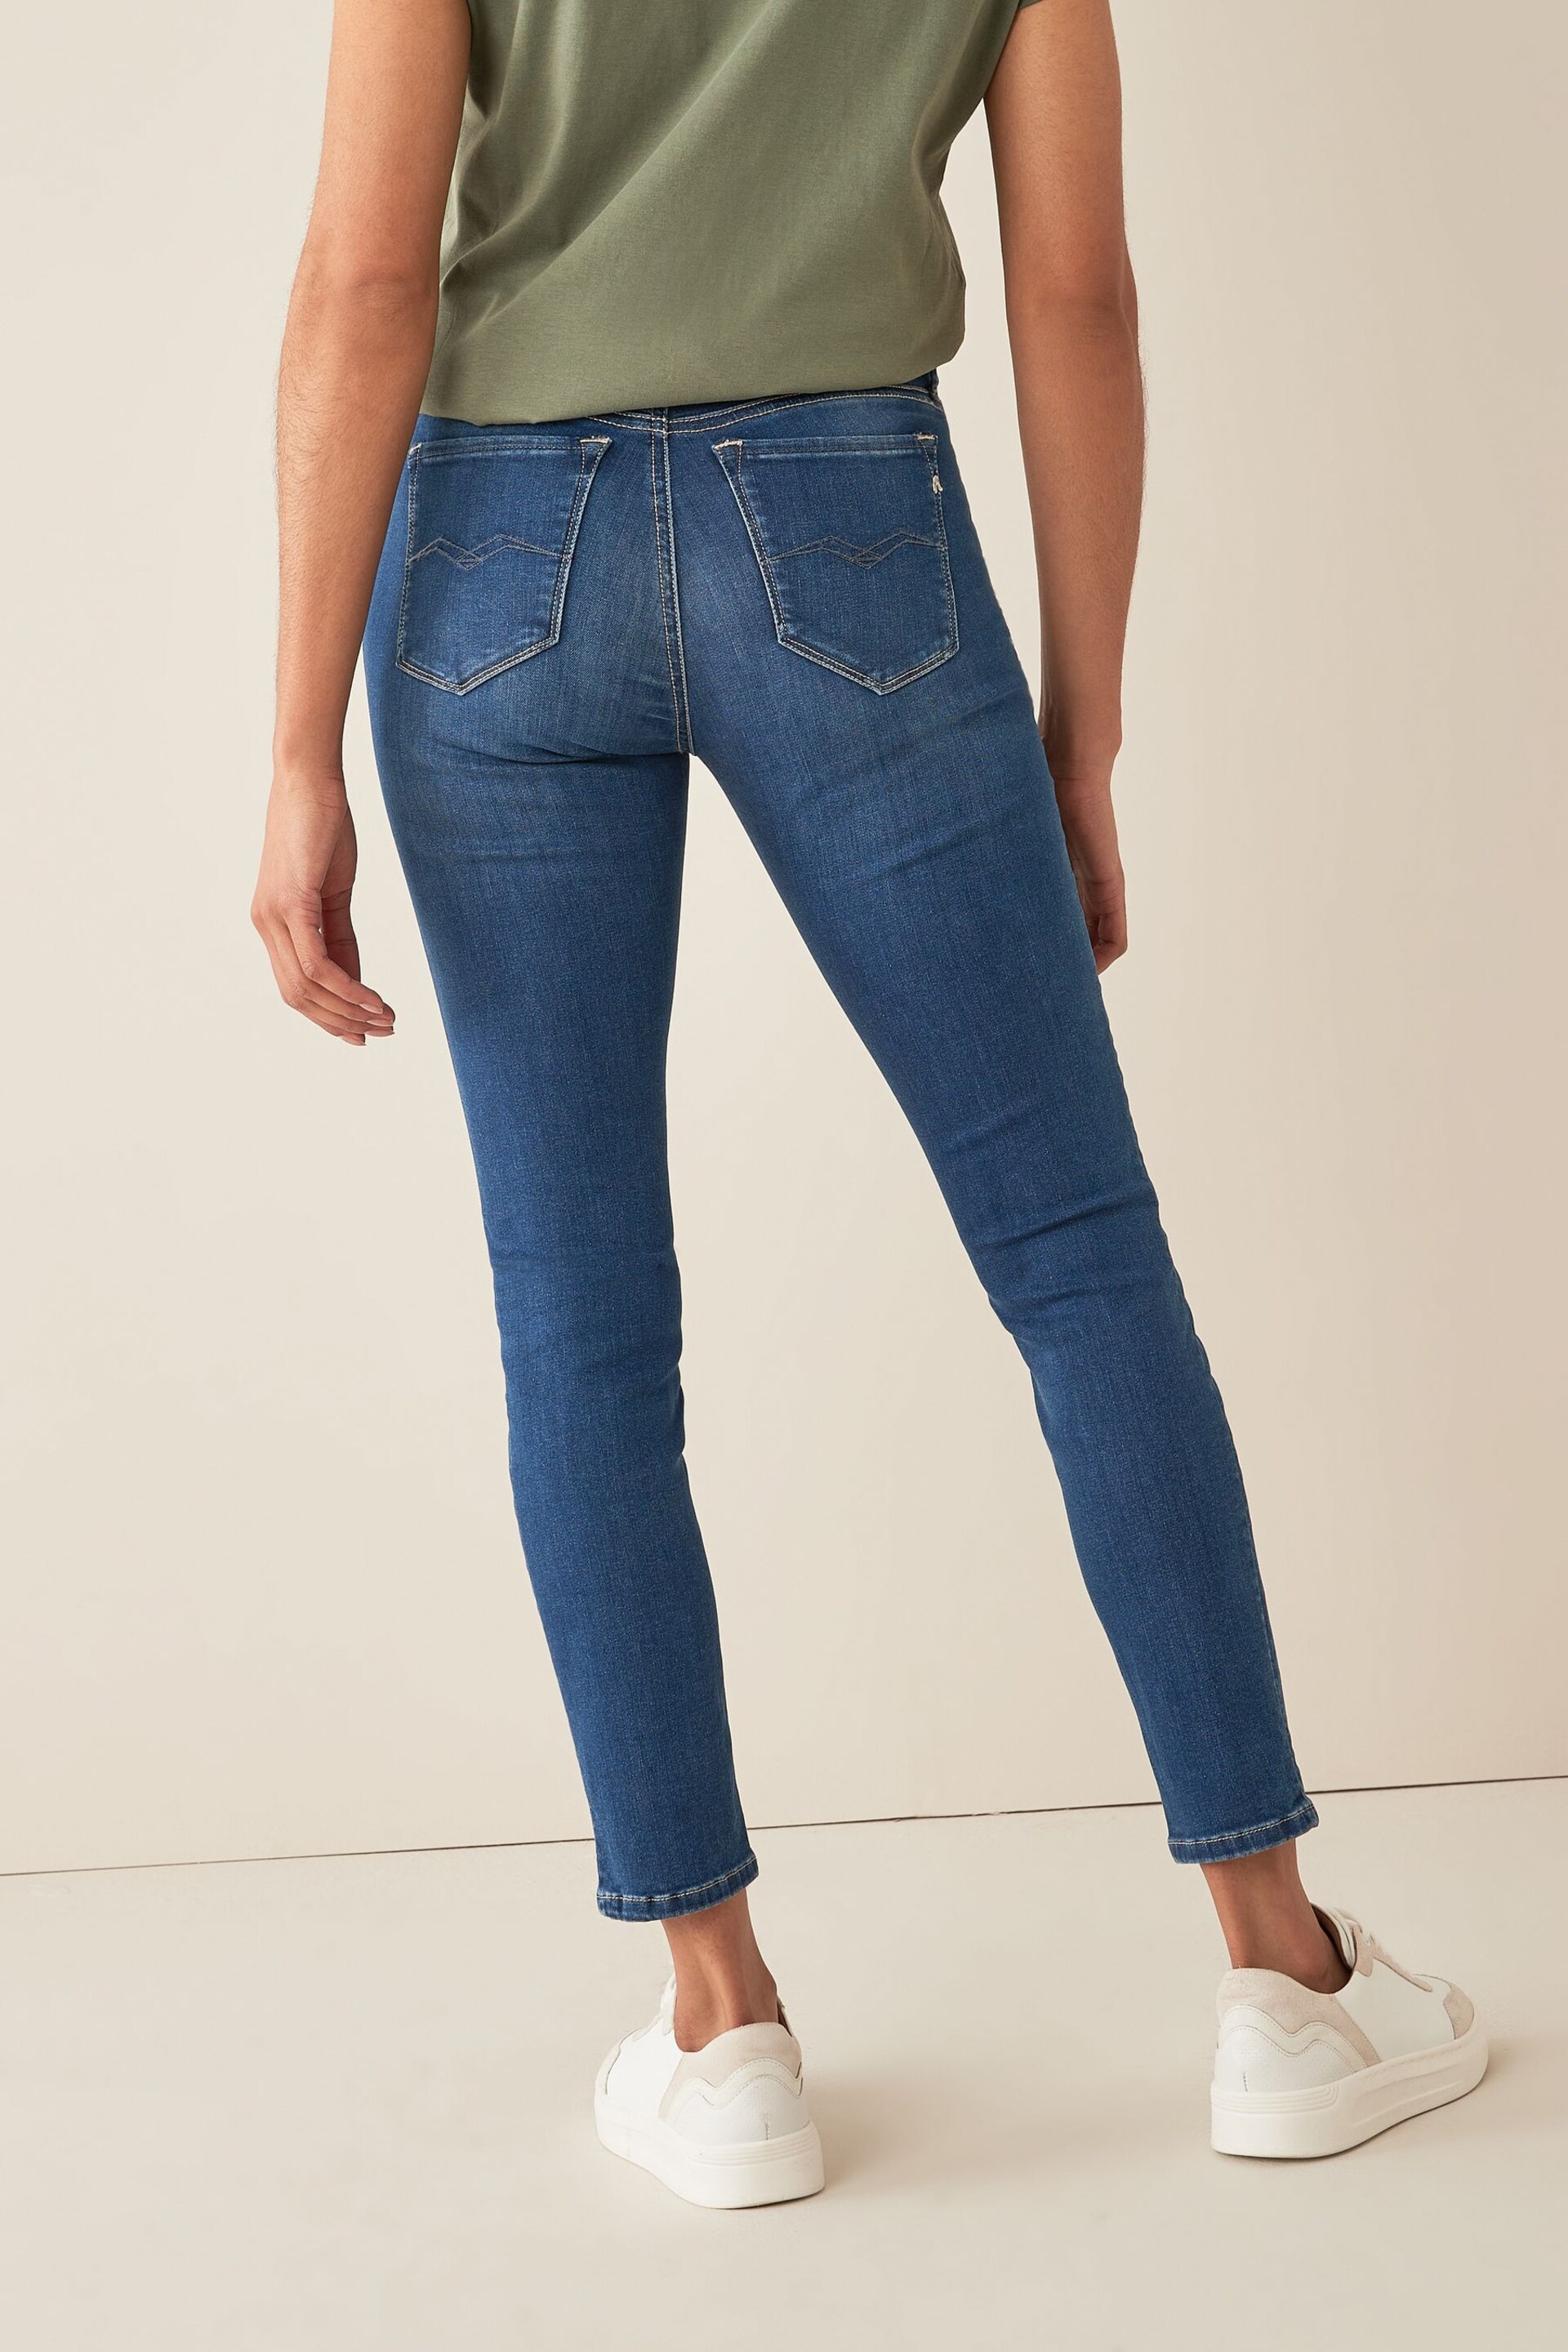 Replay Skinny Fit Luzien Jeans - Image 2 of 7